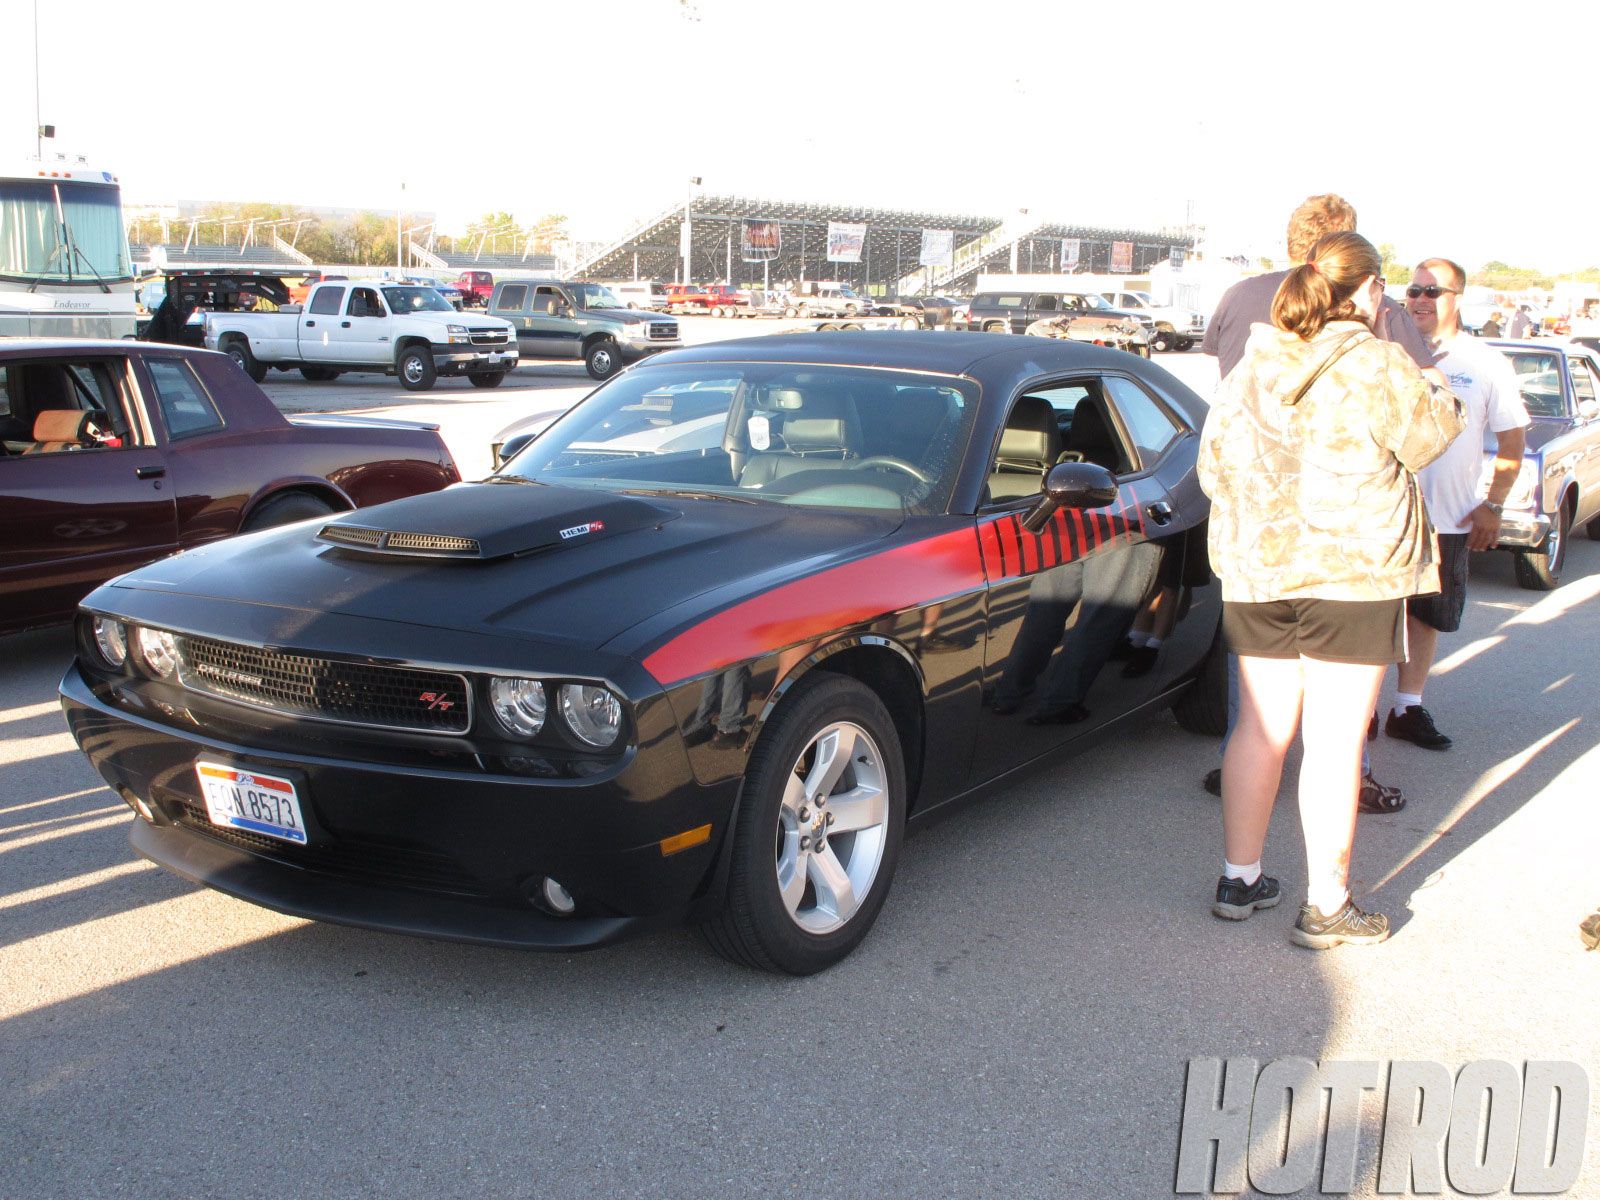 Attached picture 7475467-hrdp-1209w-2012-drag-week-tech-day-1100.jpg